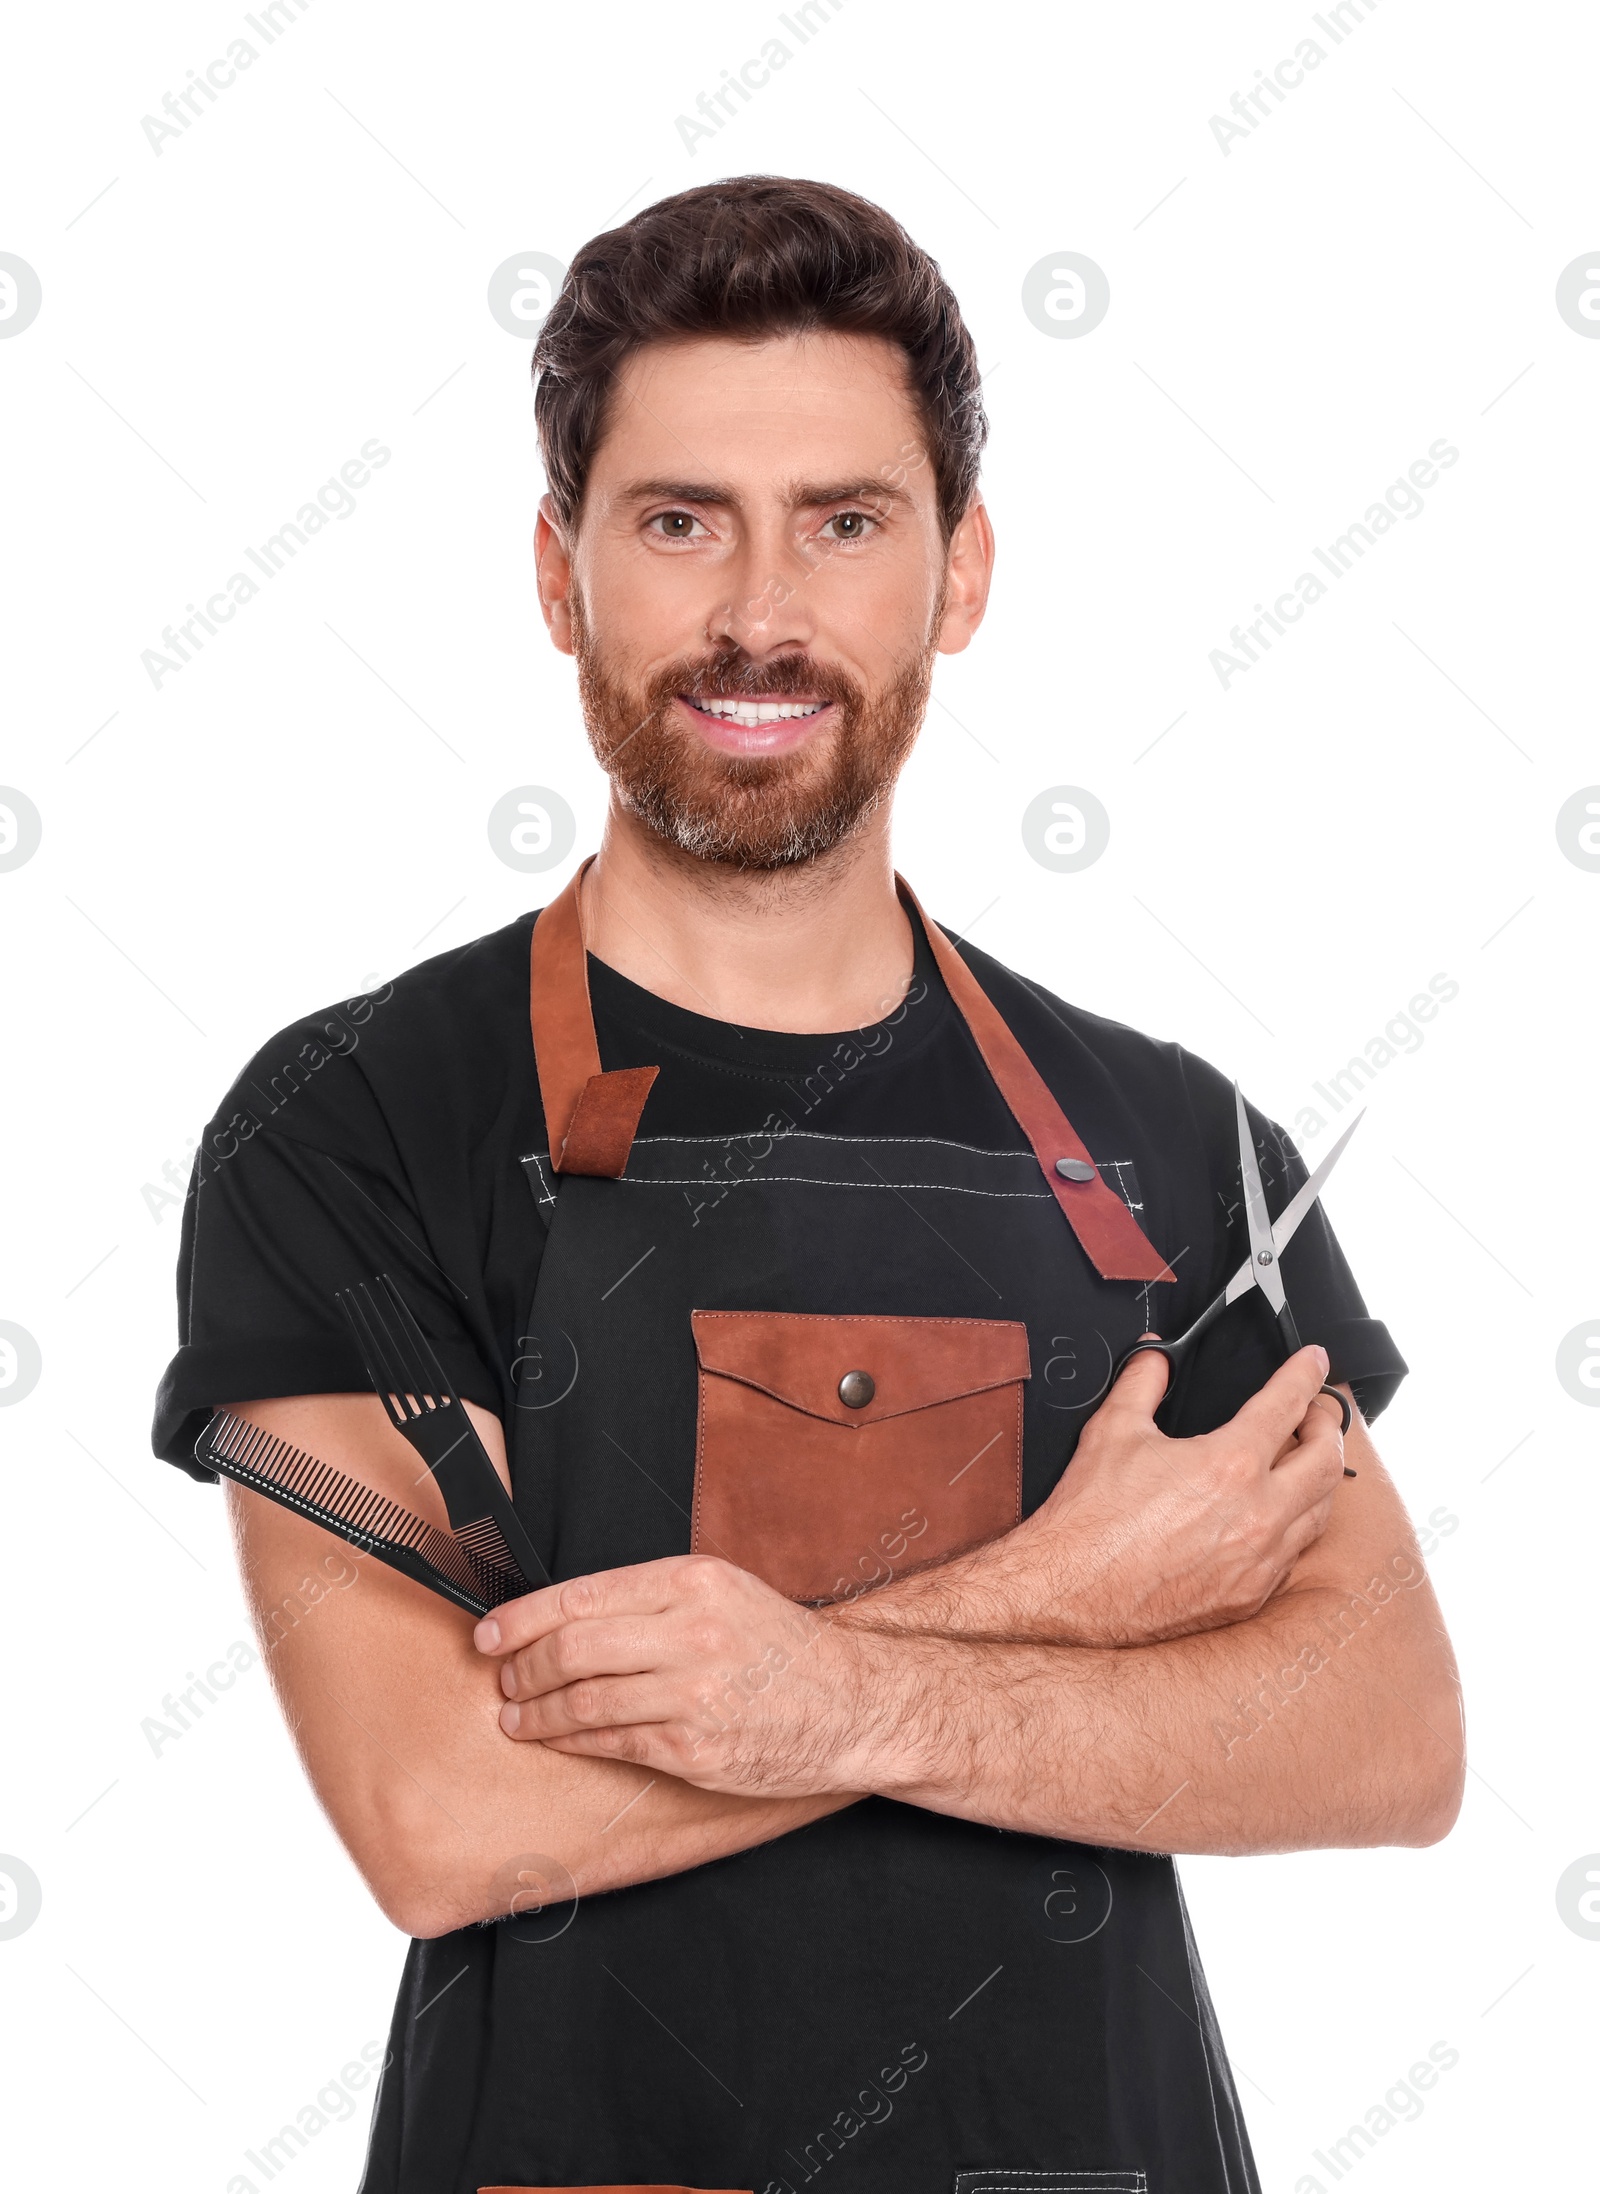 Photo of Smiling hairdresser holding combs and scissors on white background